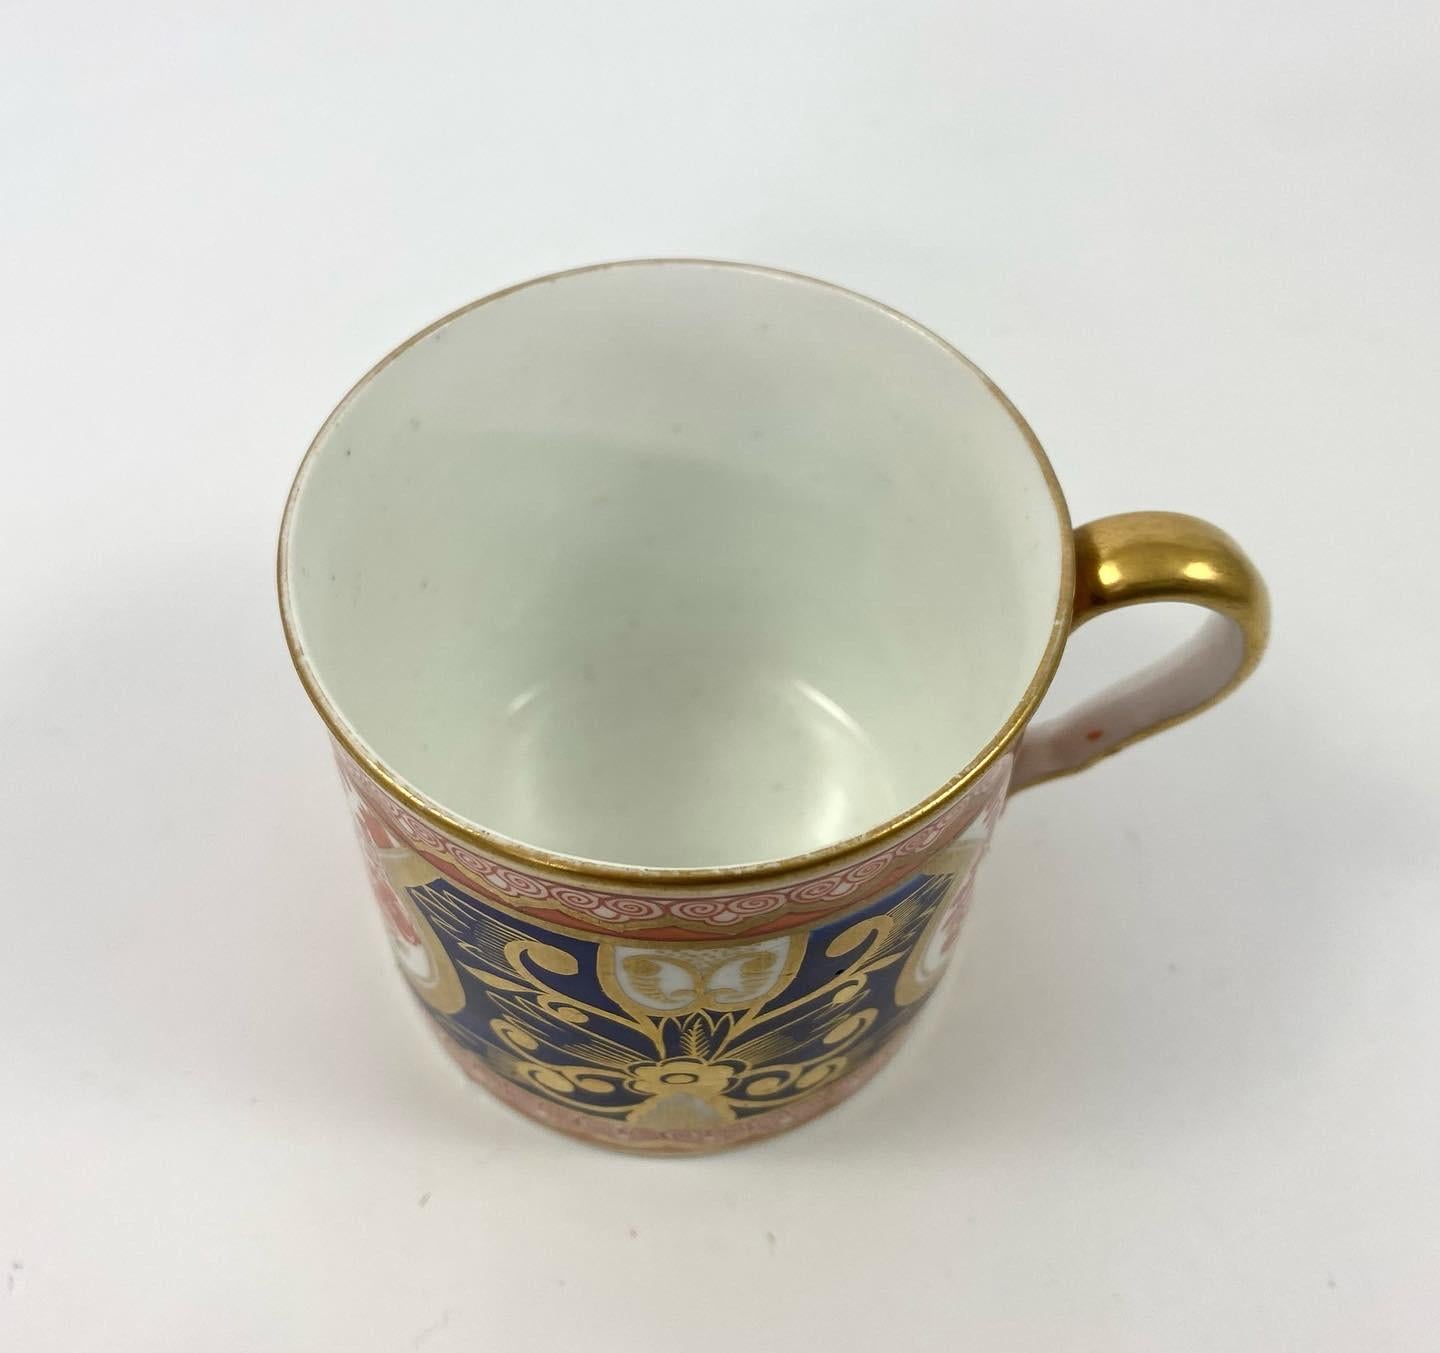 Fired Spode Porcelain Coffee Can, Imari Pattern, c. 1810